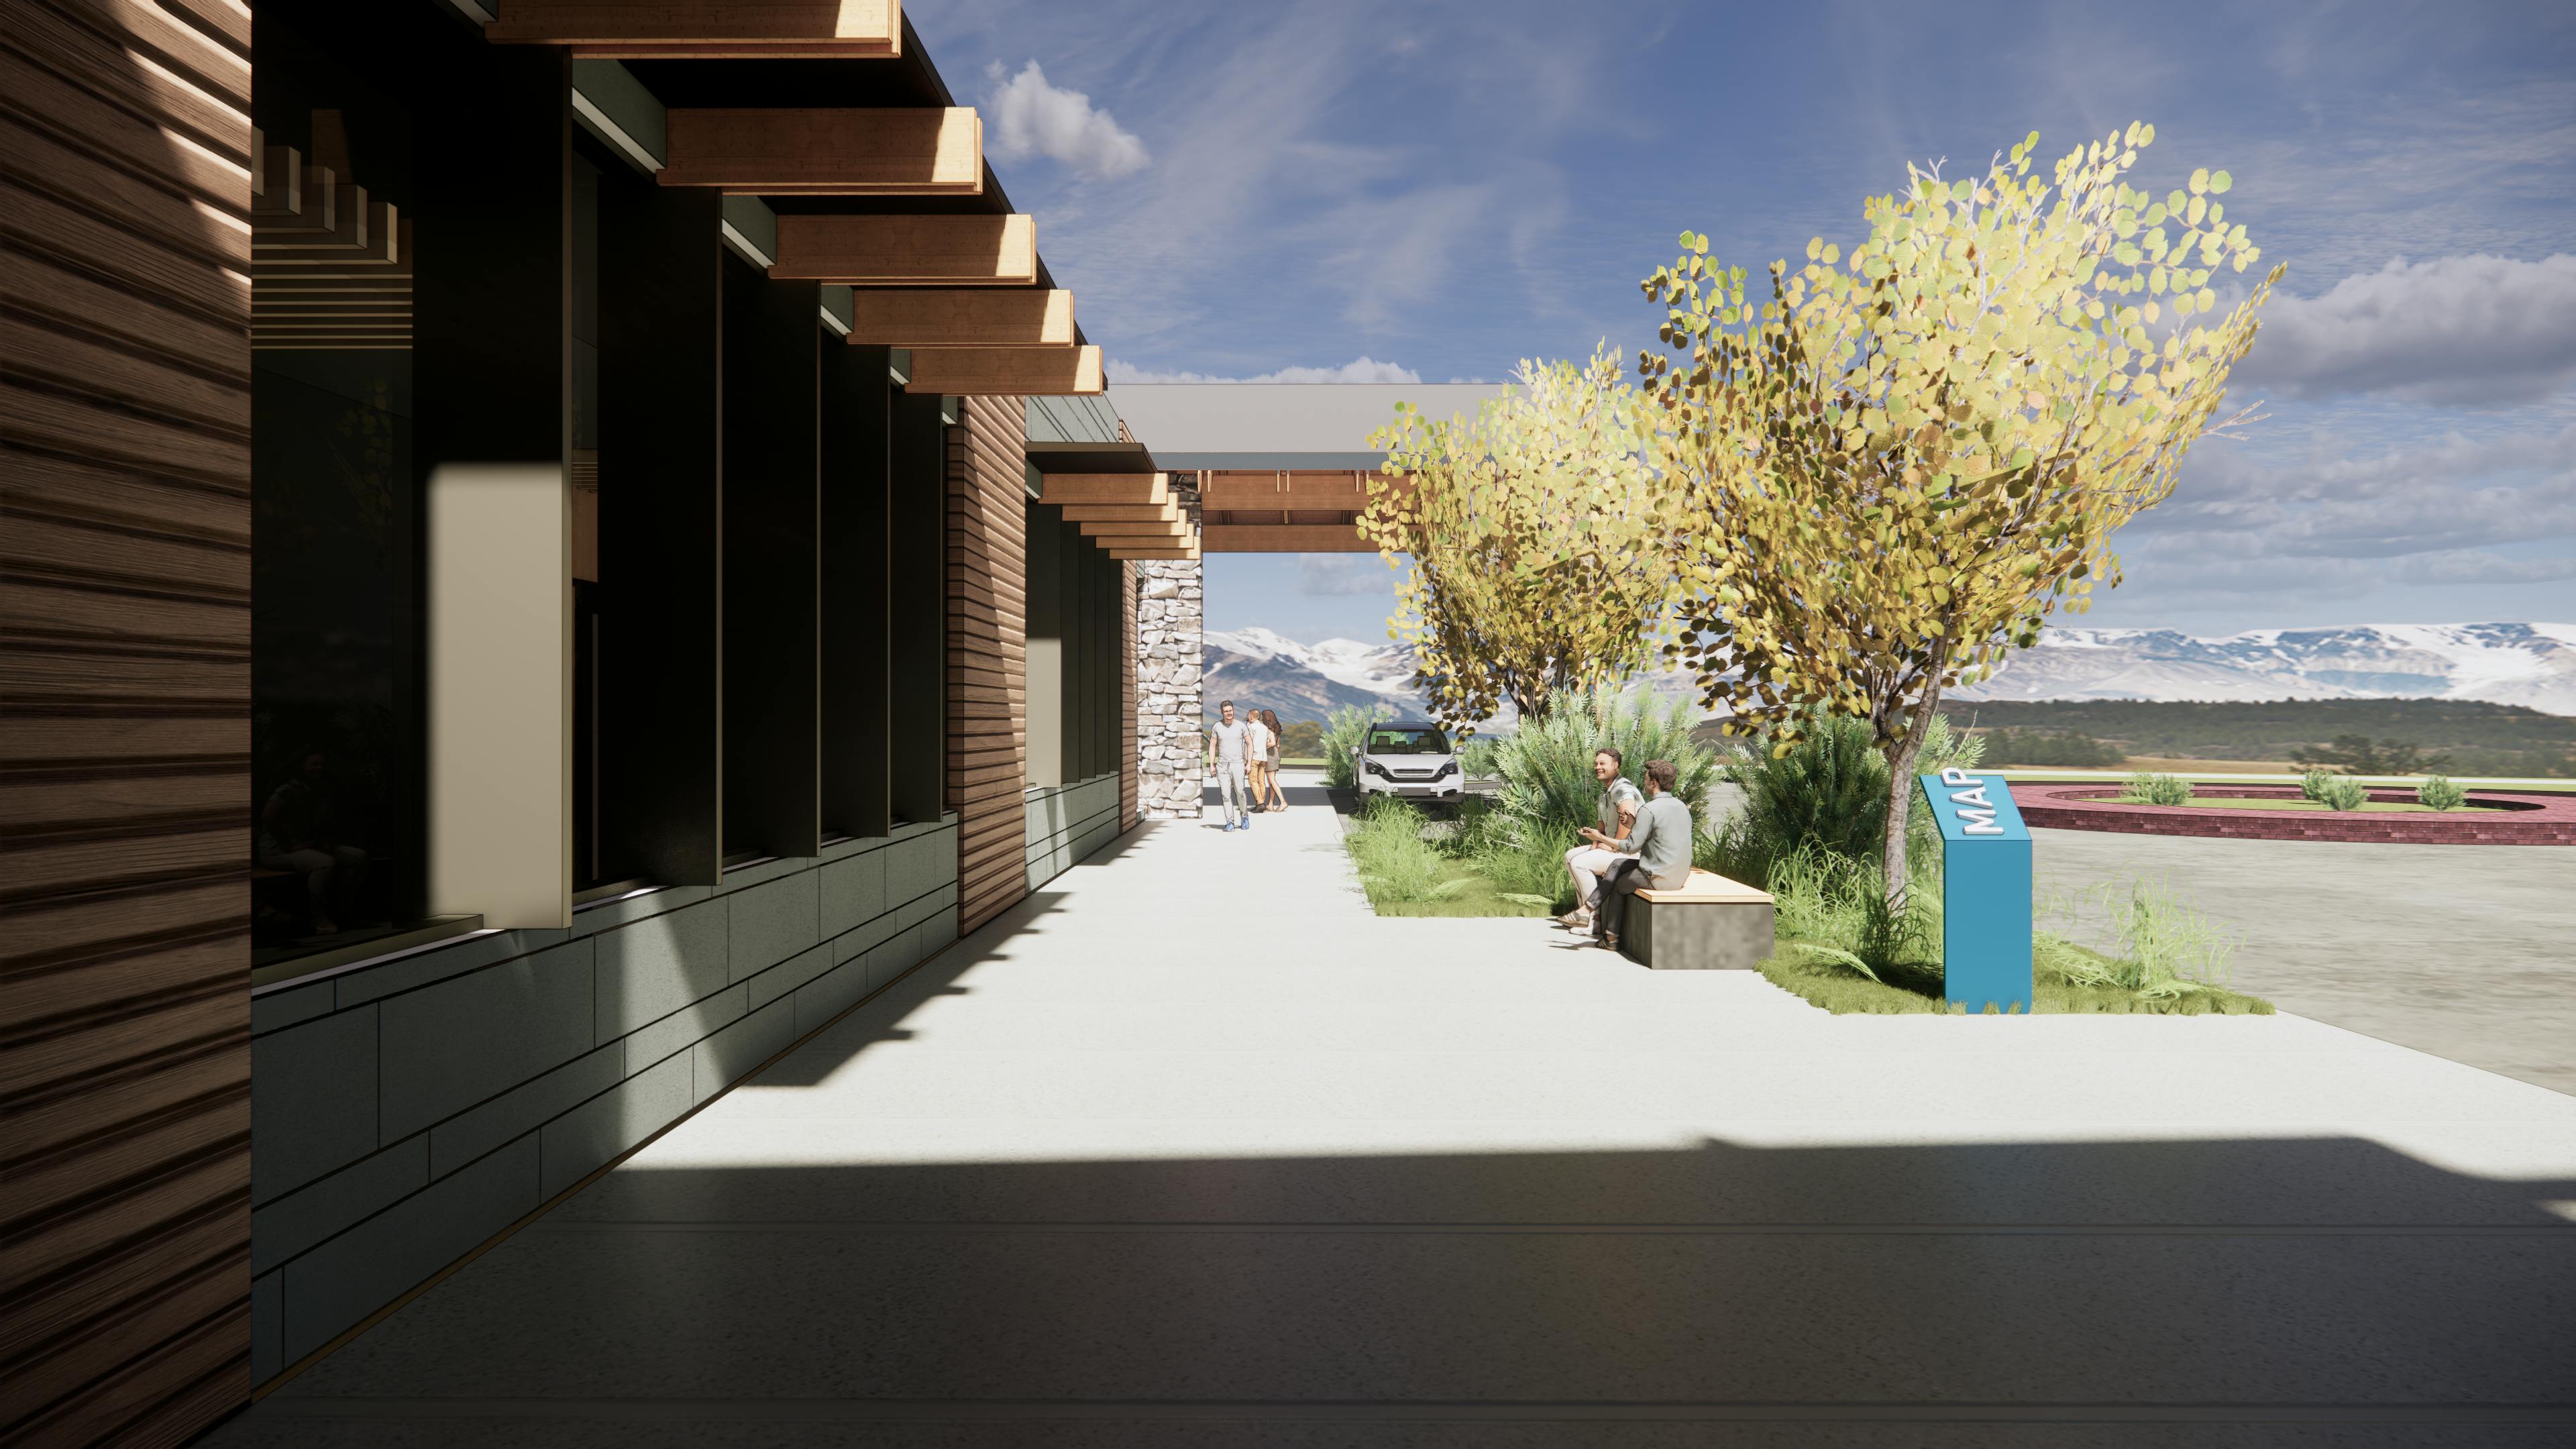 A 3D rendering of the OOC ambulatory surgery center showing large soffit beams and natural looking landscaping. 